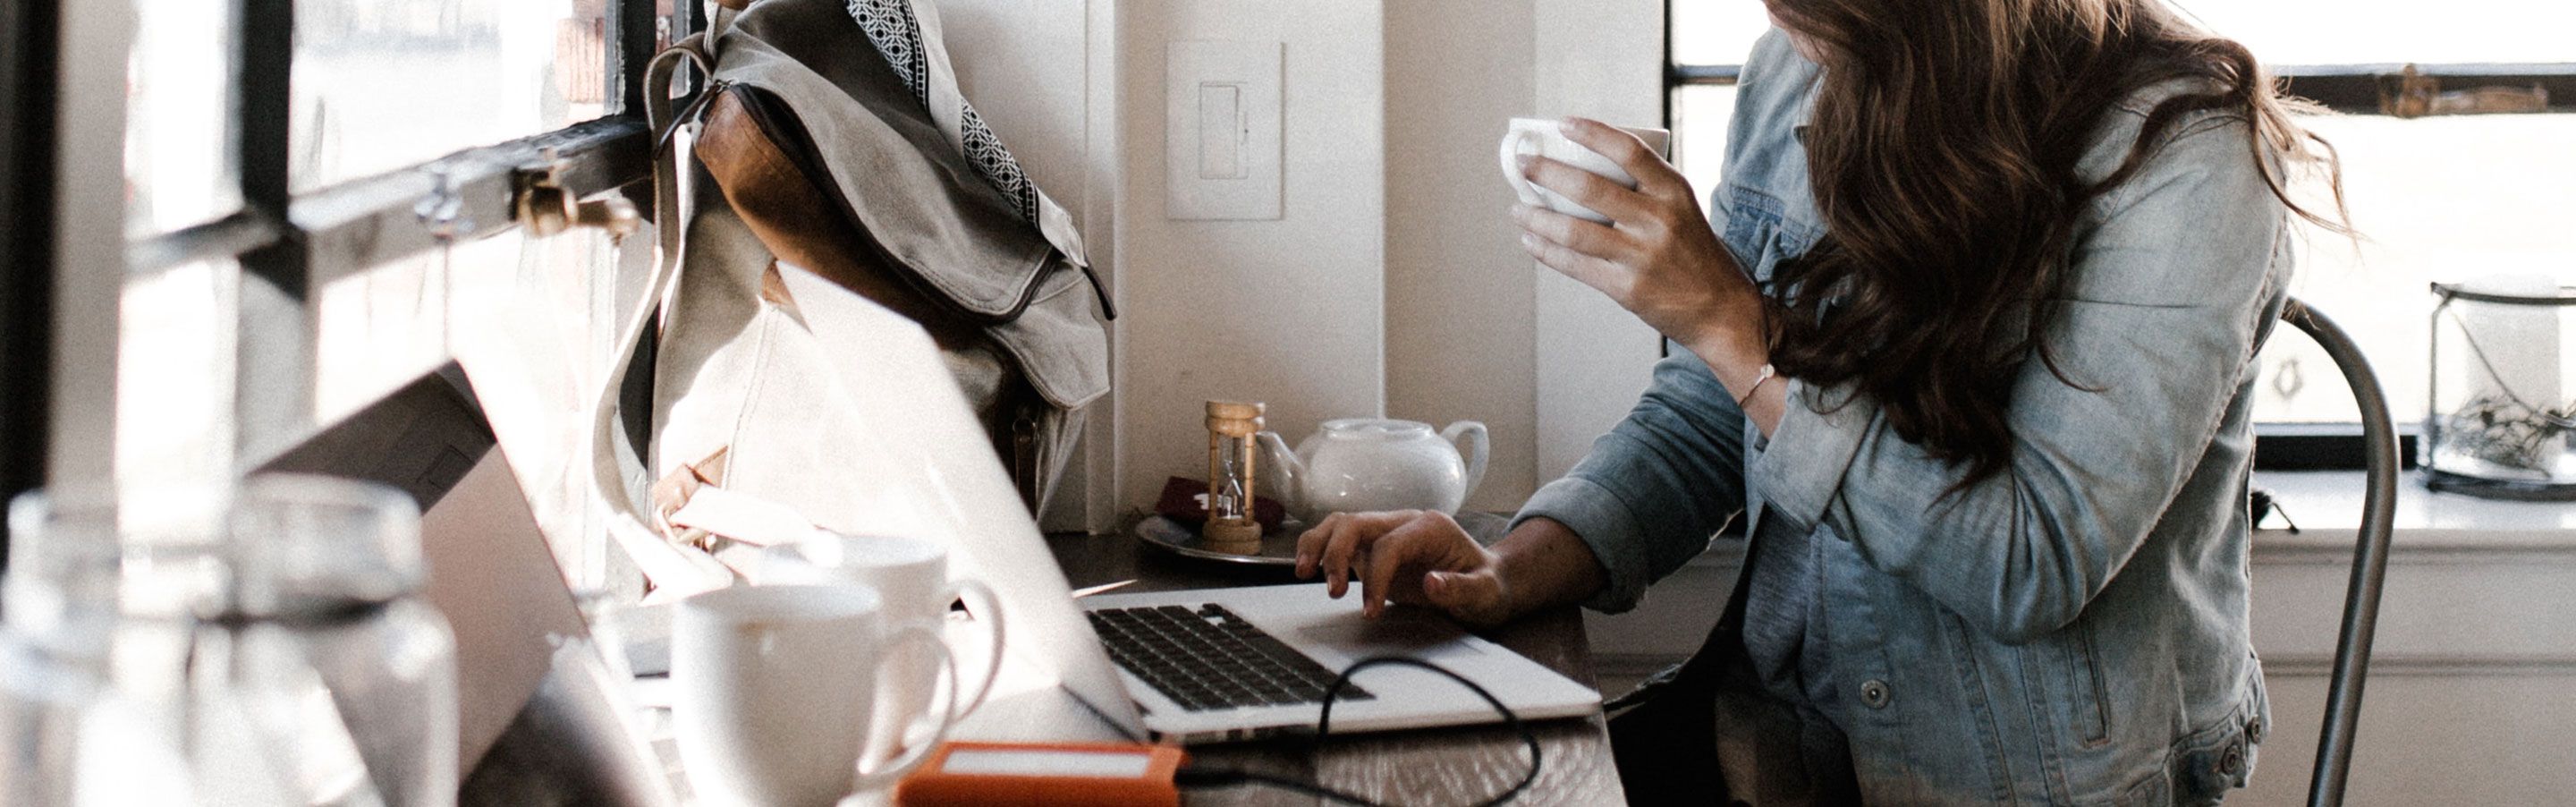 How My Life Changed Since I Became a Full-Time Freelancer